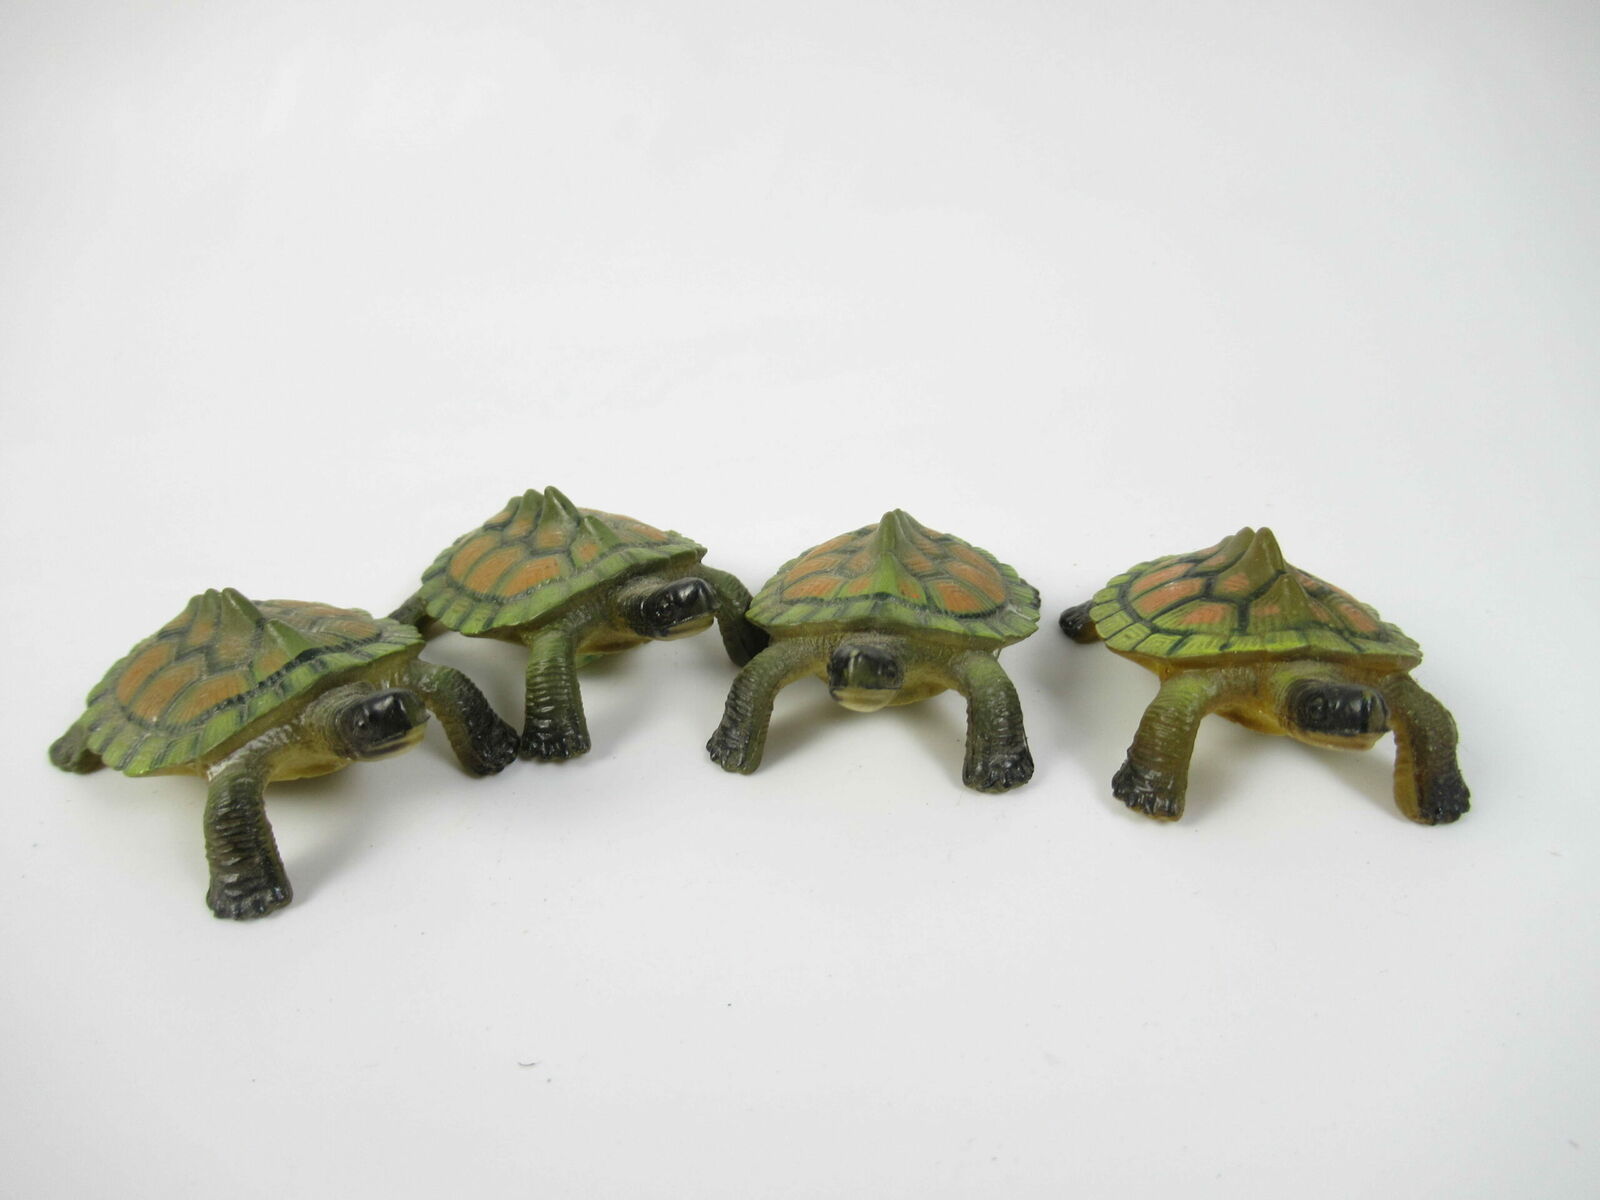 LOT 4 VINTAGE PLASTIC SIGNED TURTLE COLLECTION FIGURINES PENDANTS PAPERWEIGHT